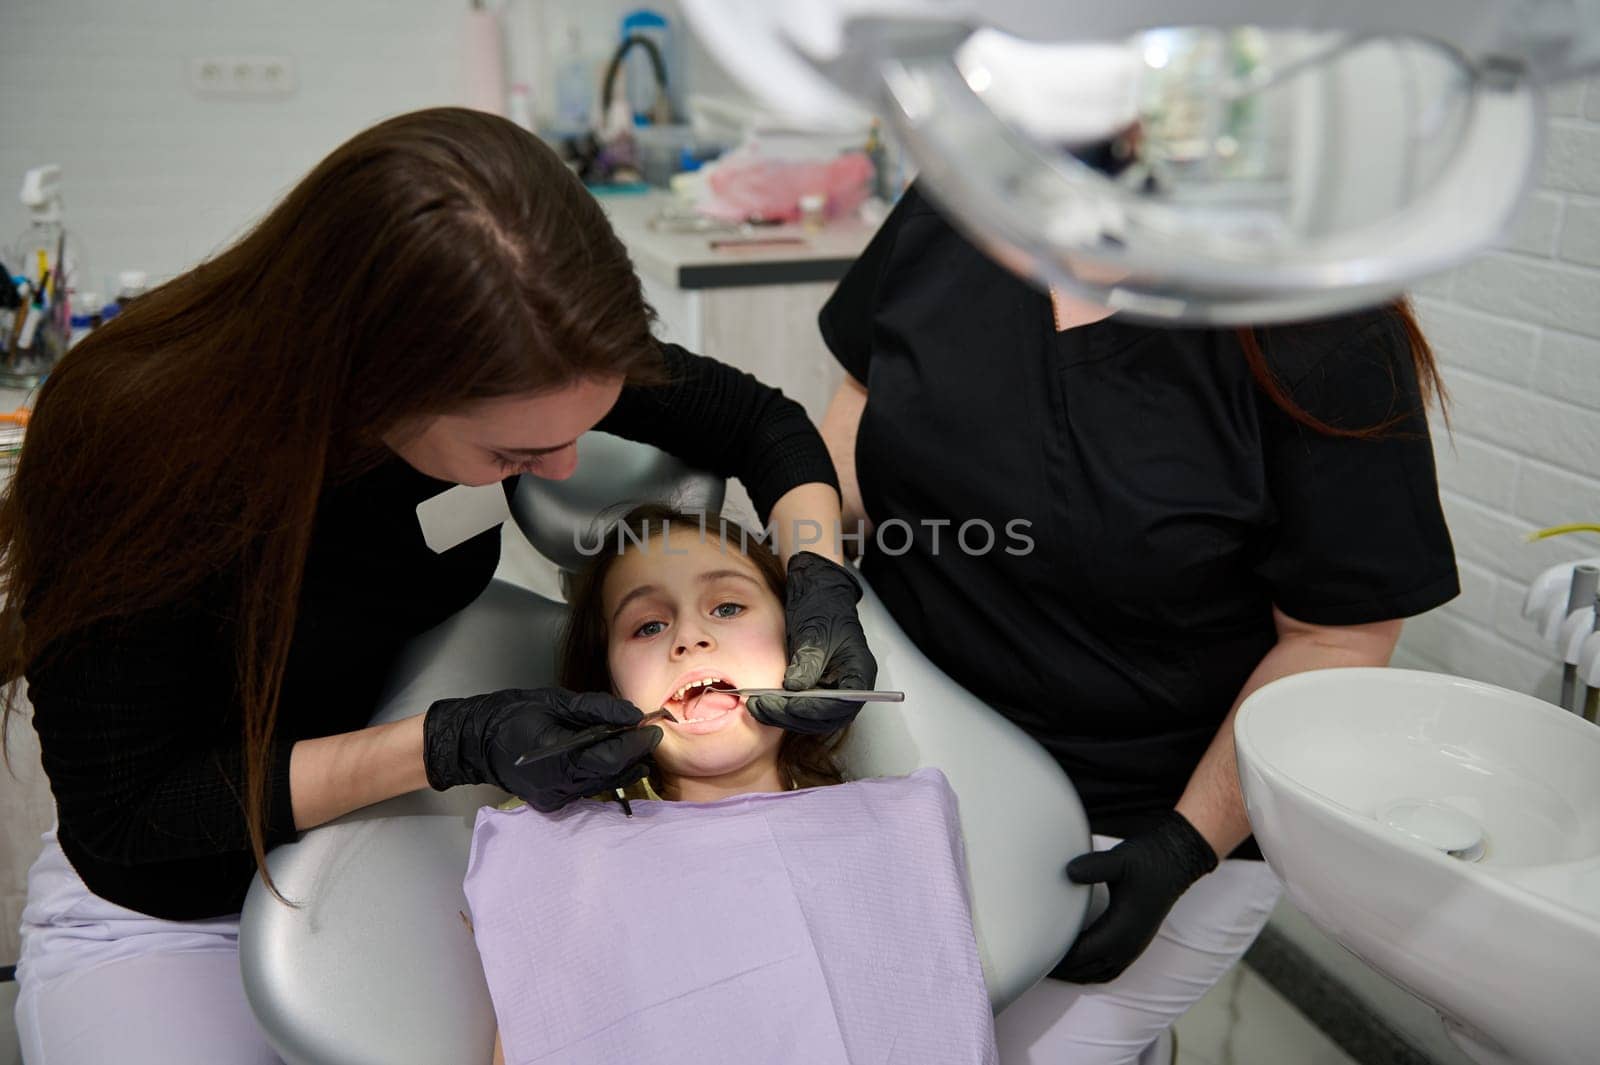 Caucasian adorable little girl with open mouth, sitting in dentist chair, getting teeth examination in pediatric dentistry clinic. Woman dental hygienist using dental mirror checking kid's oral cavity